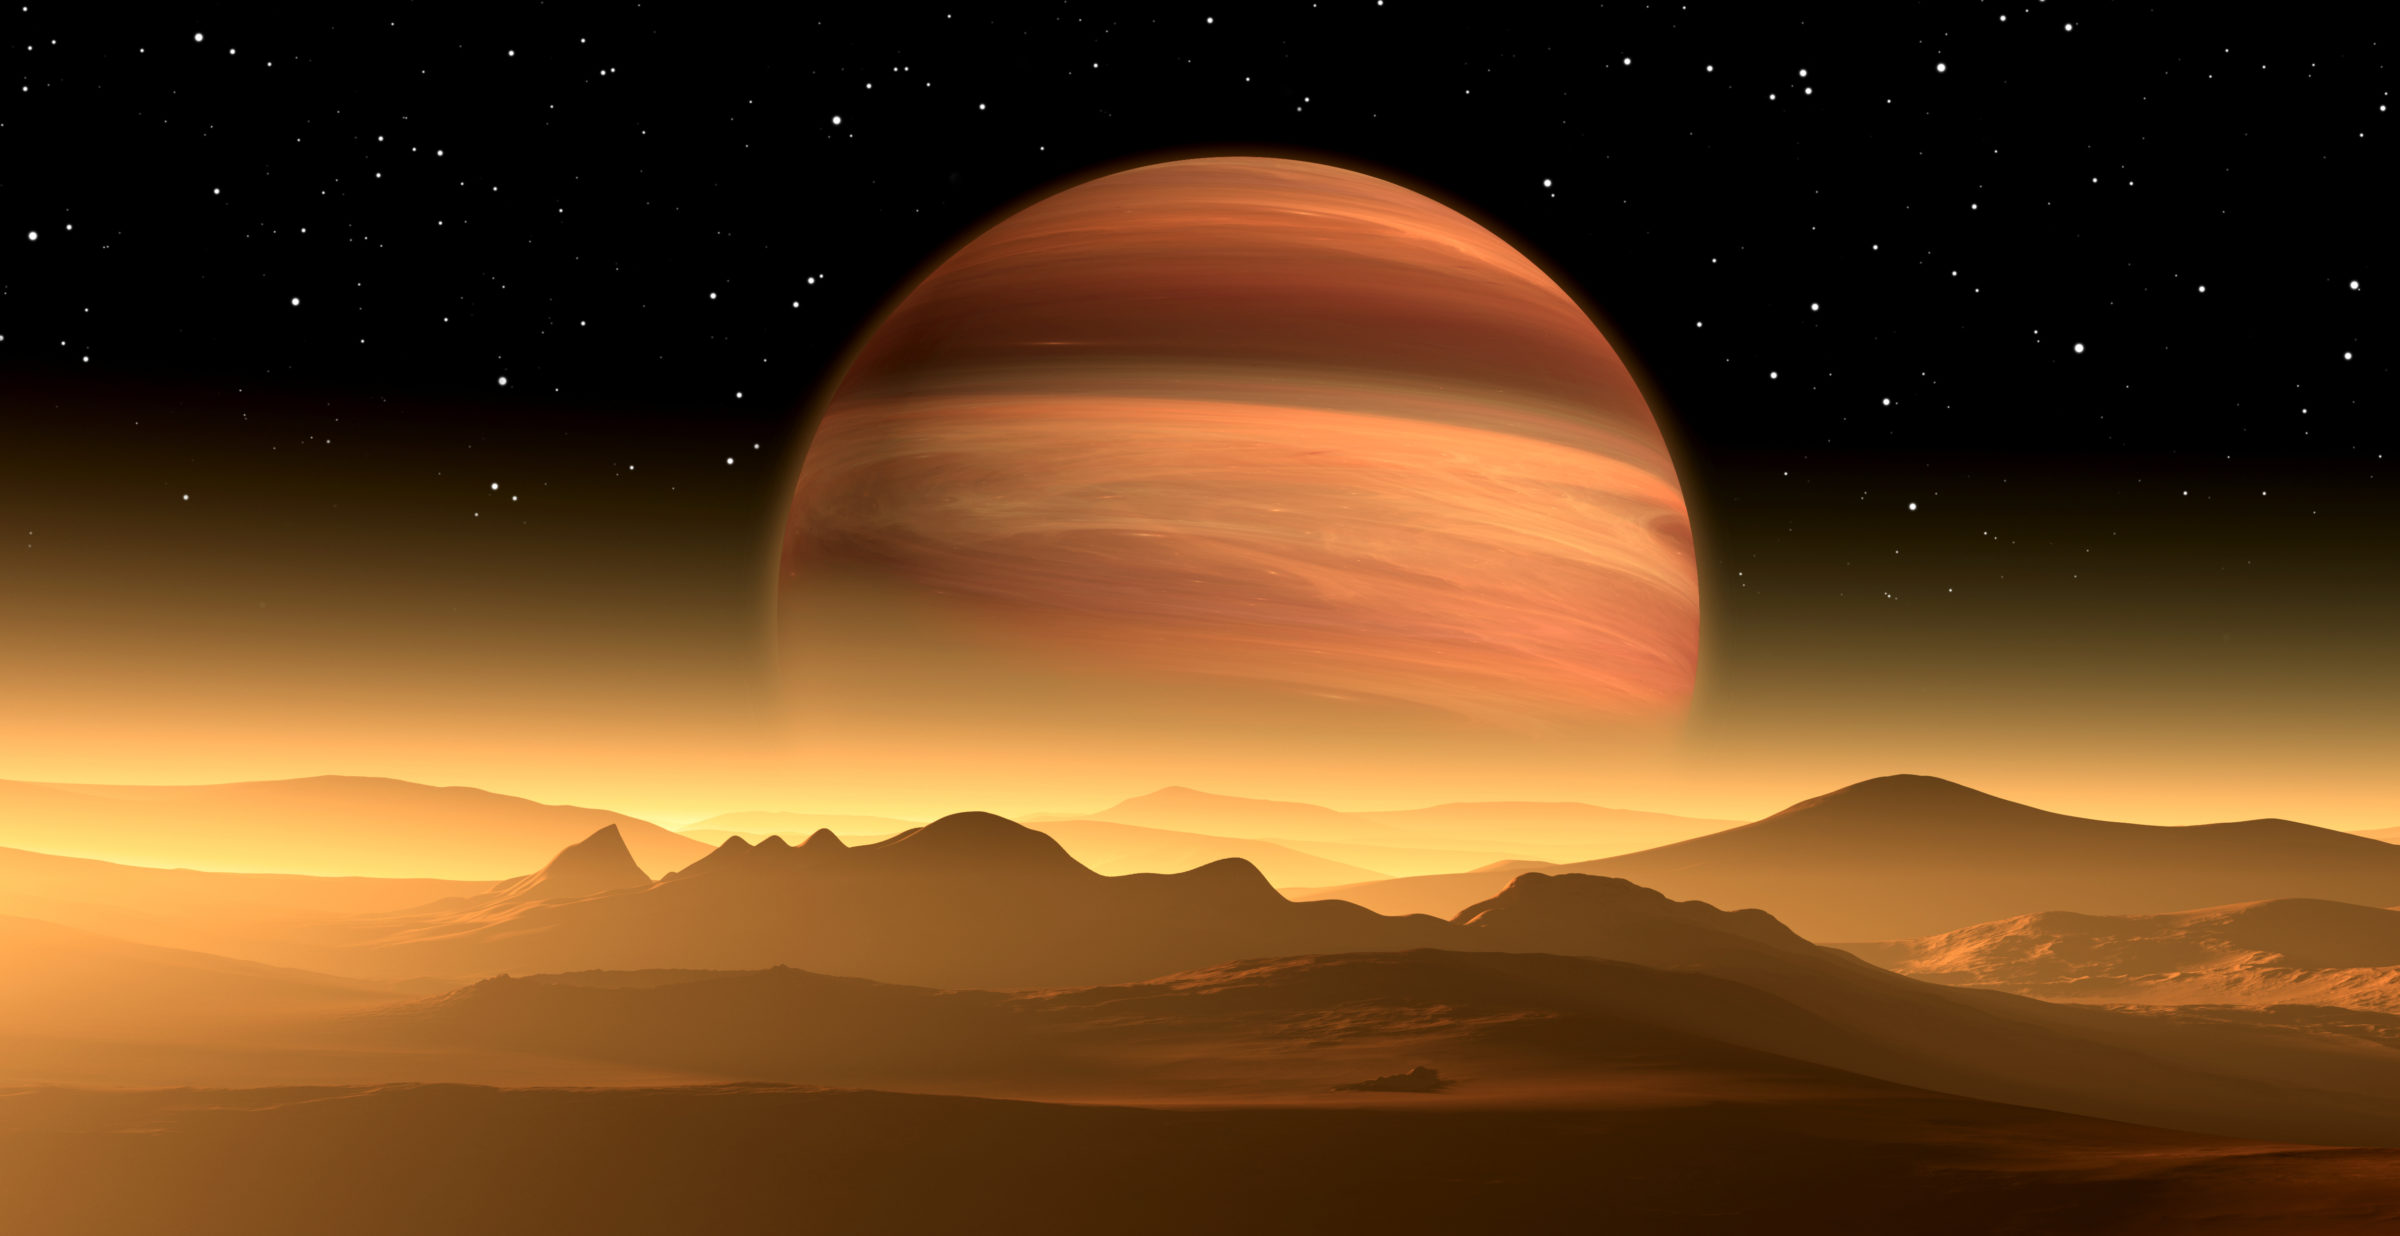 New Exoplanet or Extrasolar gas giant planet similar to Jupiter with moon